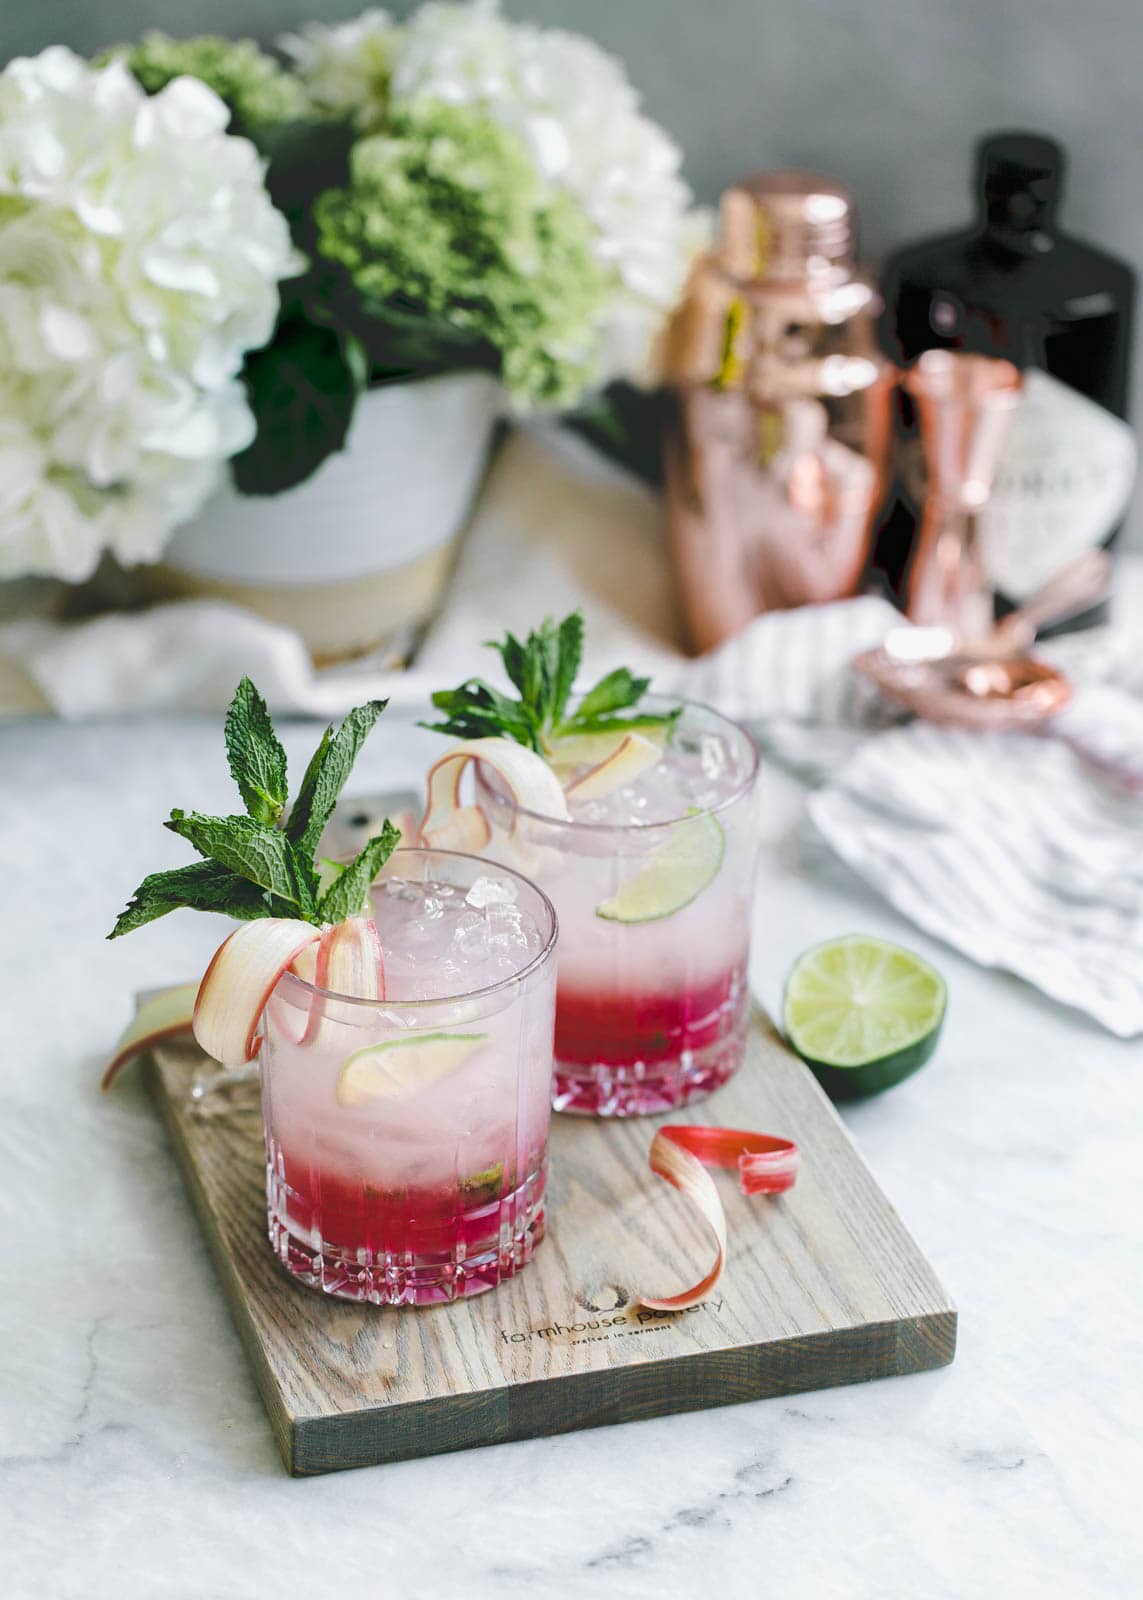 A thirst-quenching Rhubarb Mint Mojito made with rhubarb syrup, fresh mint, and lime. YUM.